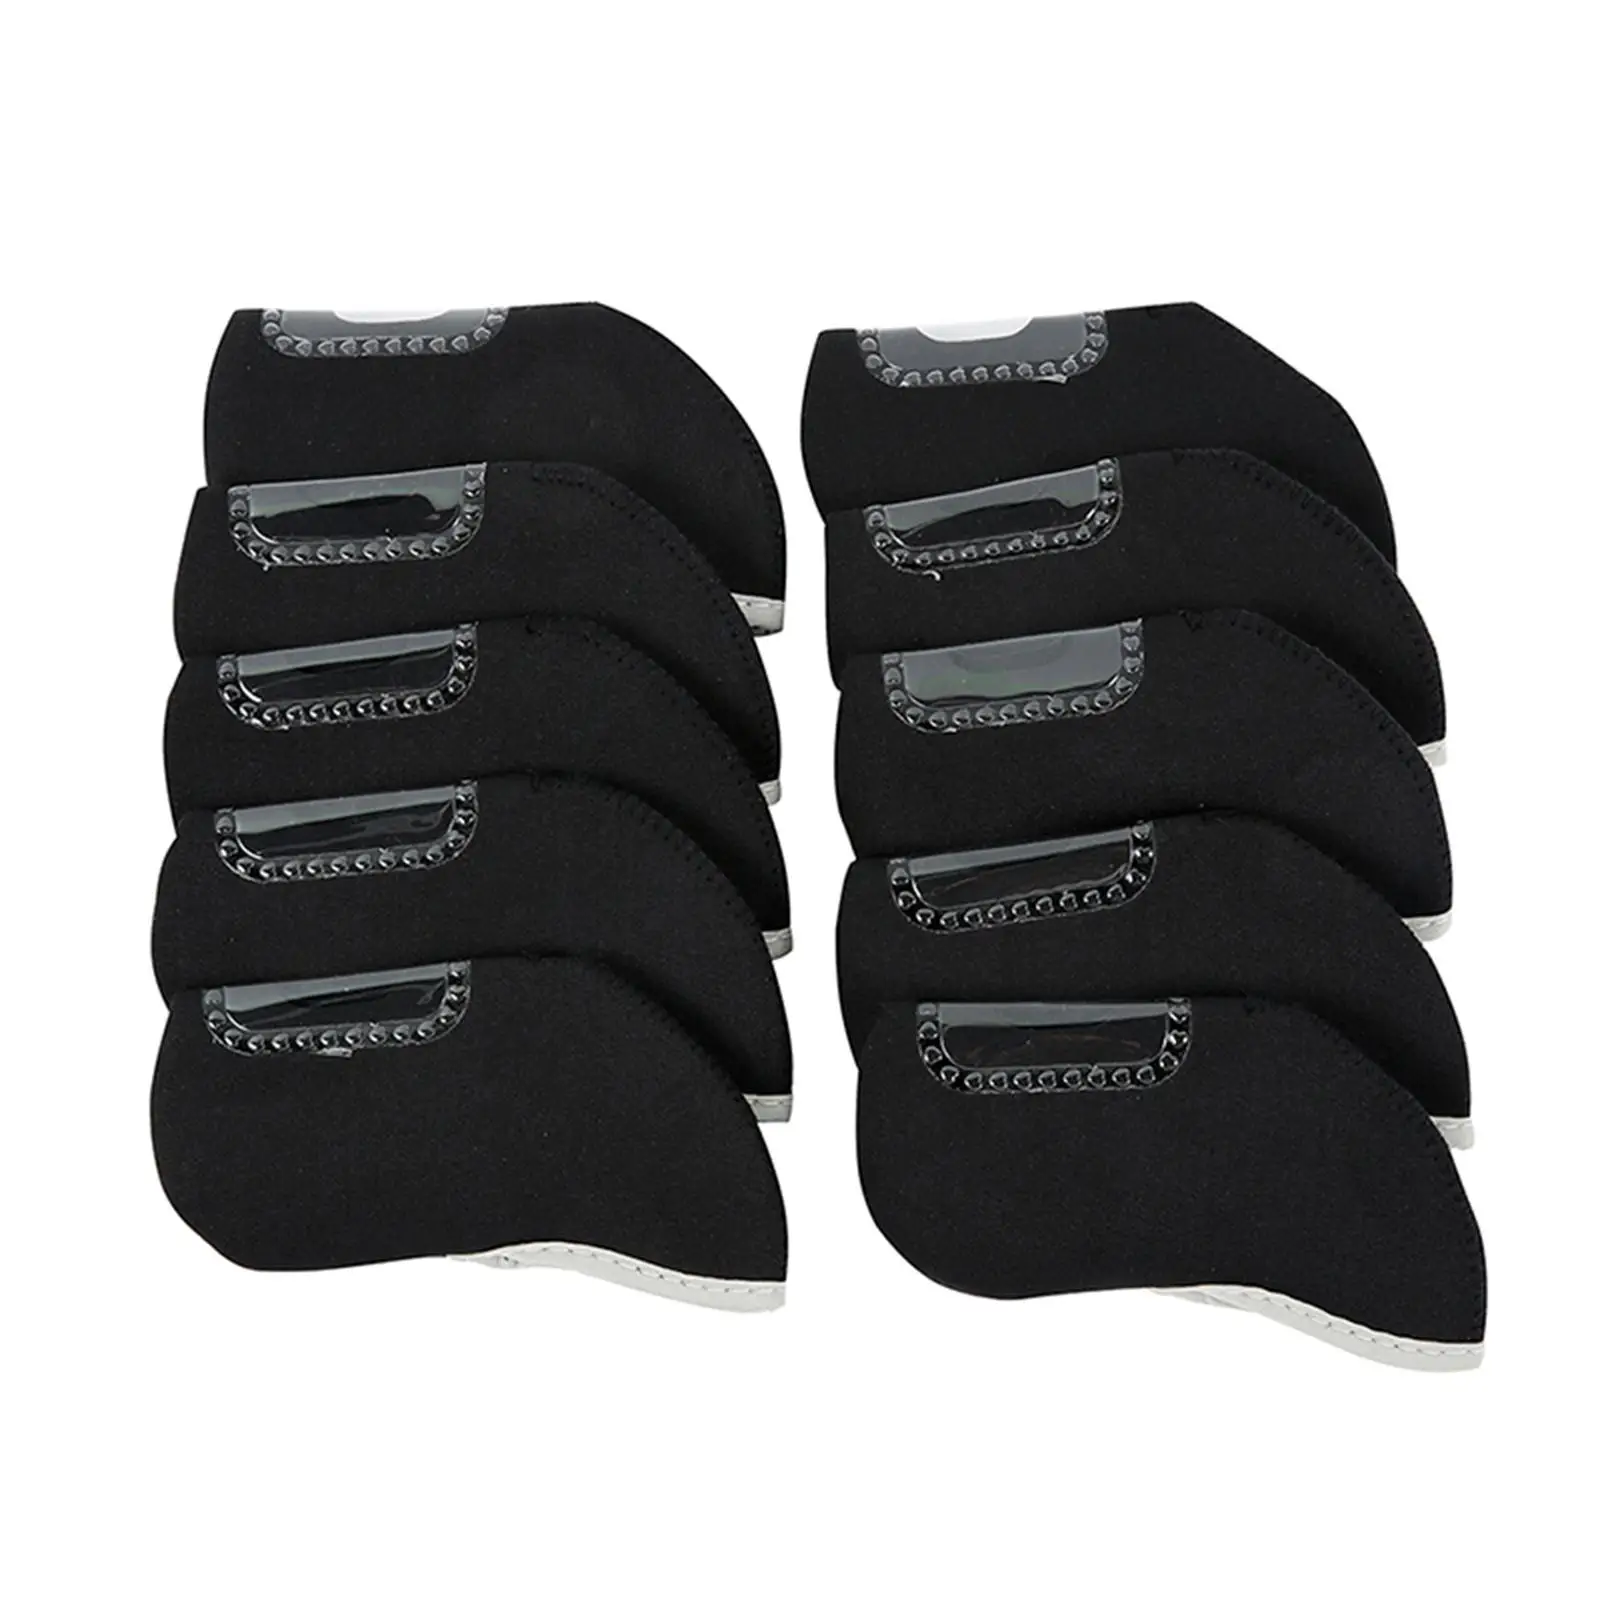 10Pcs Golf Iron Headcovers Set, Transport Protection with Transparent Window, Waterproof Guard Iron Club Covers